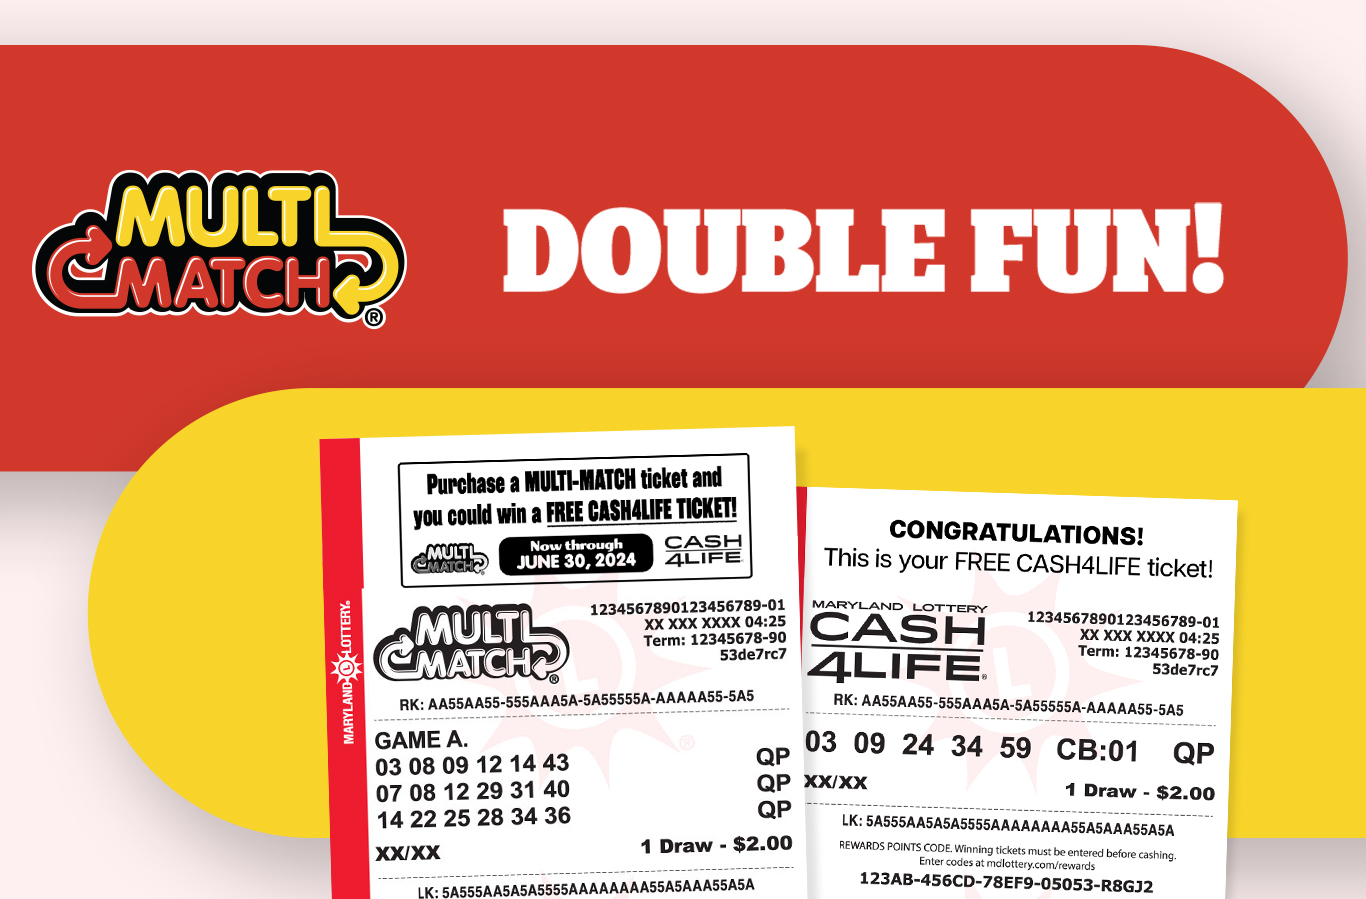 Now playing Multi-Match could be twice as nice. Just look at the top of all your Multi-Match tickets for a message that you've won a free Cash4Life ticket.